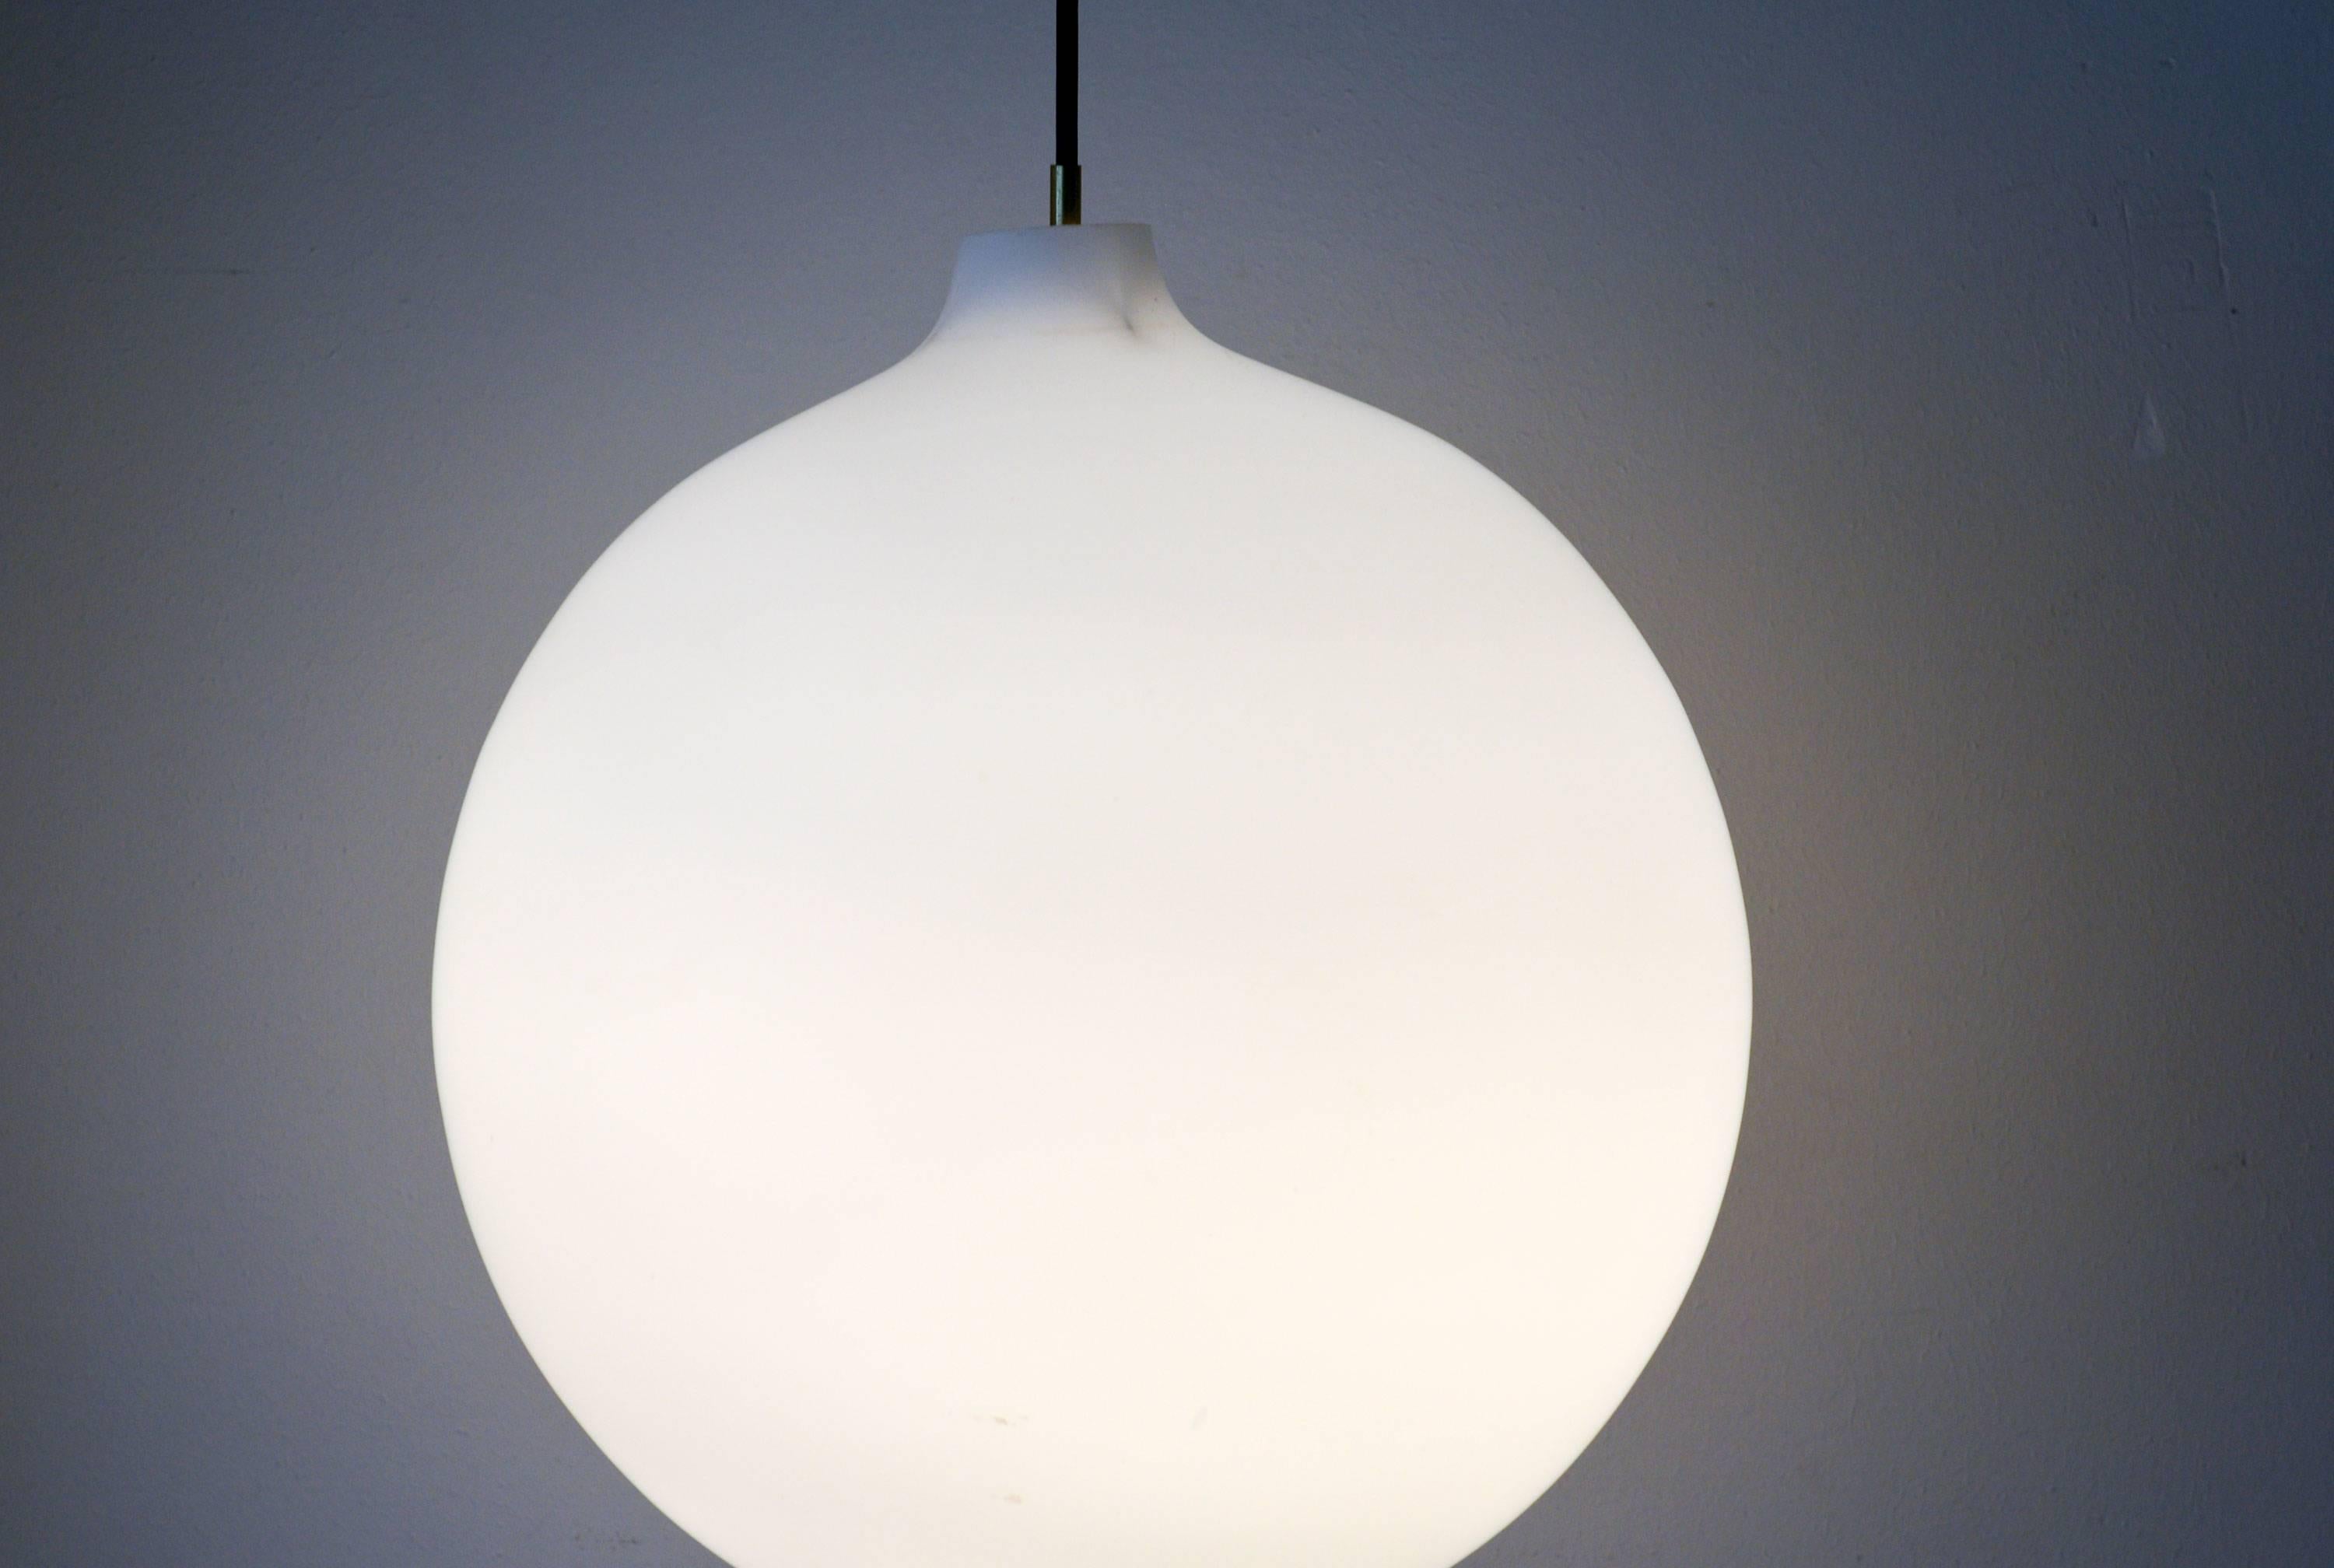 Satellite lamp by Vilhelm Wohlert for Louis Poulsen,
Denmark, 1950.
This is the vintage big version with a diameter of 40 by 42 cm.
White glass ball with an elegant brass stem that holds the socket and conceals the wire.
The glass shade gives an